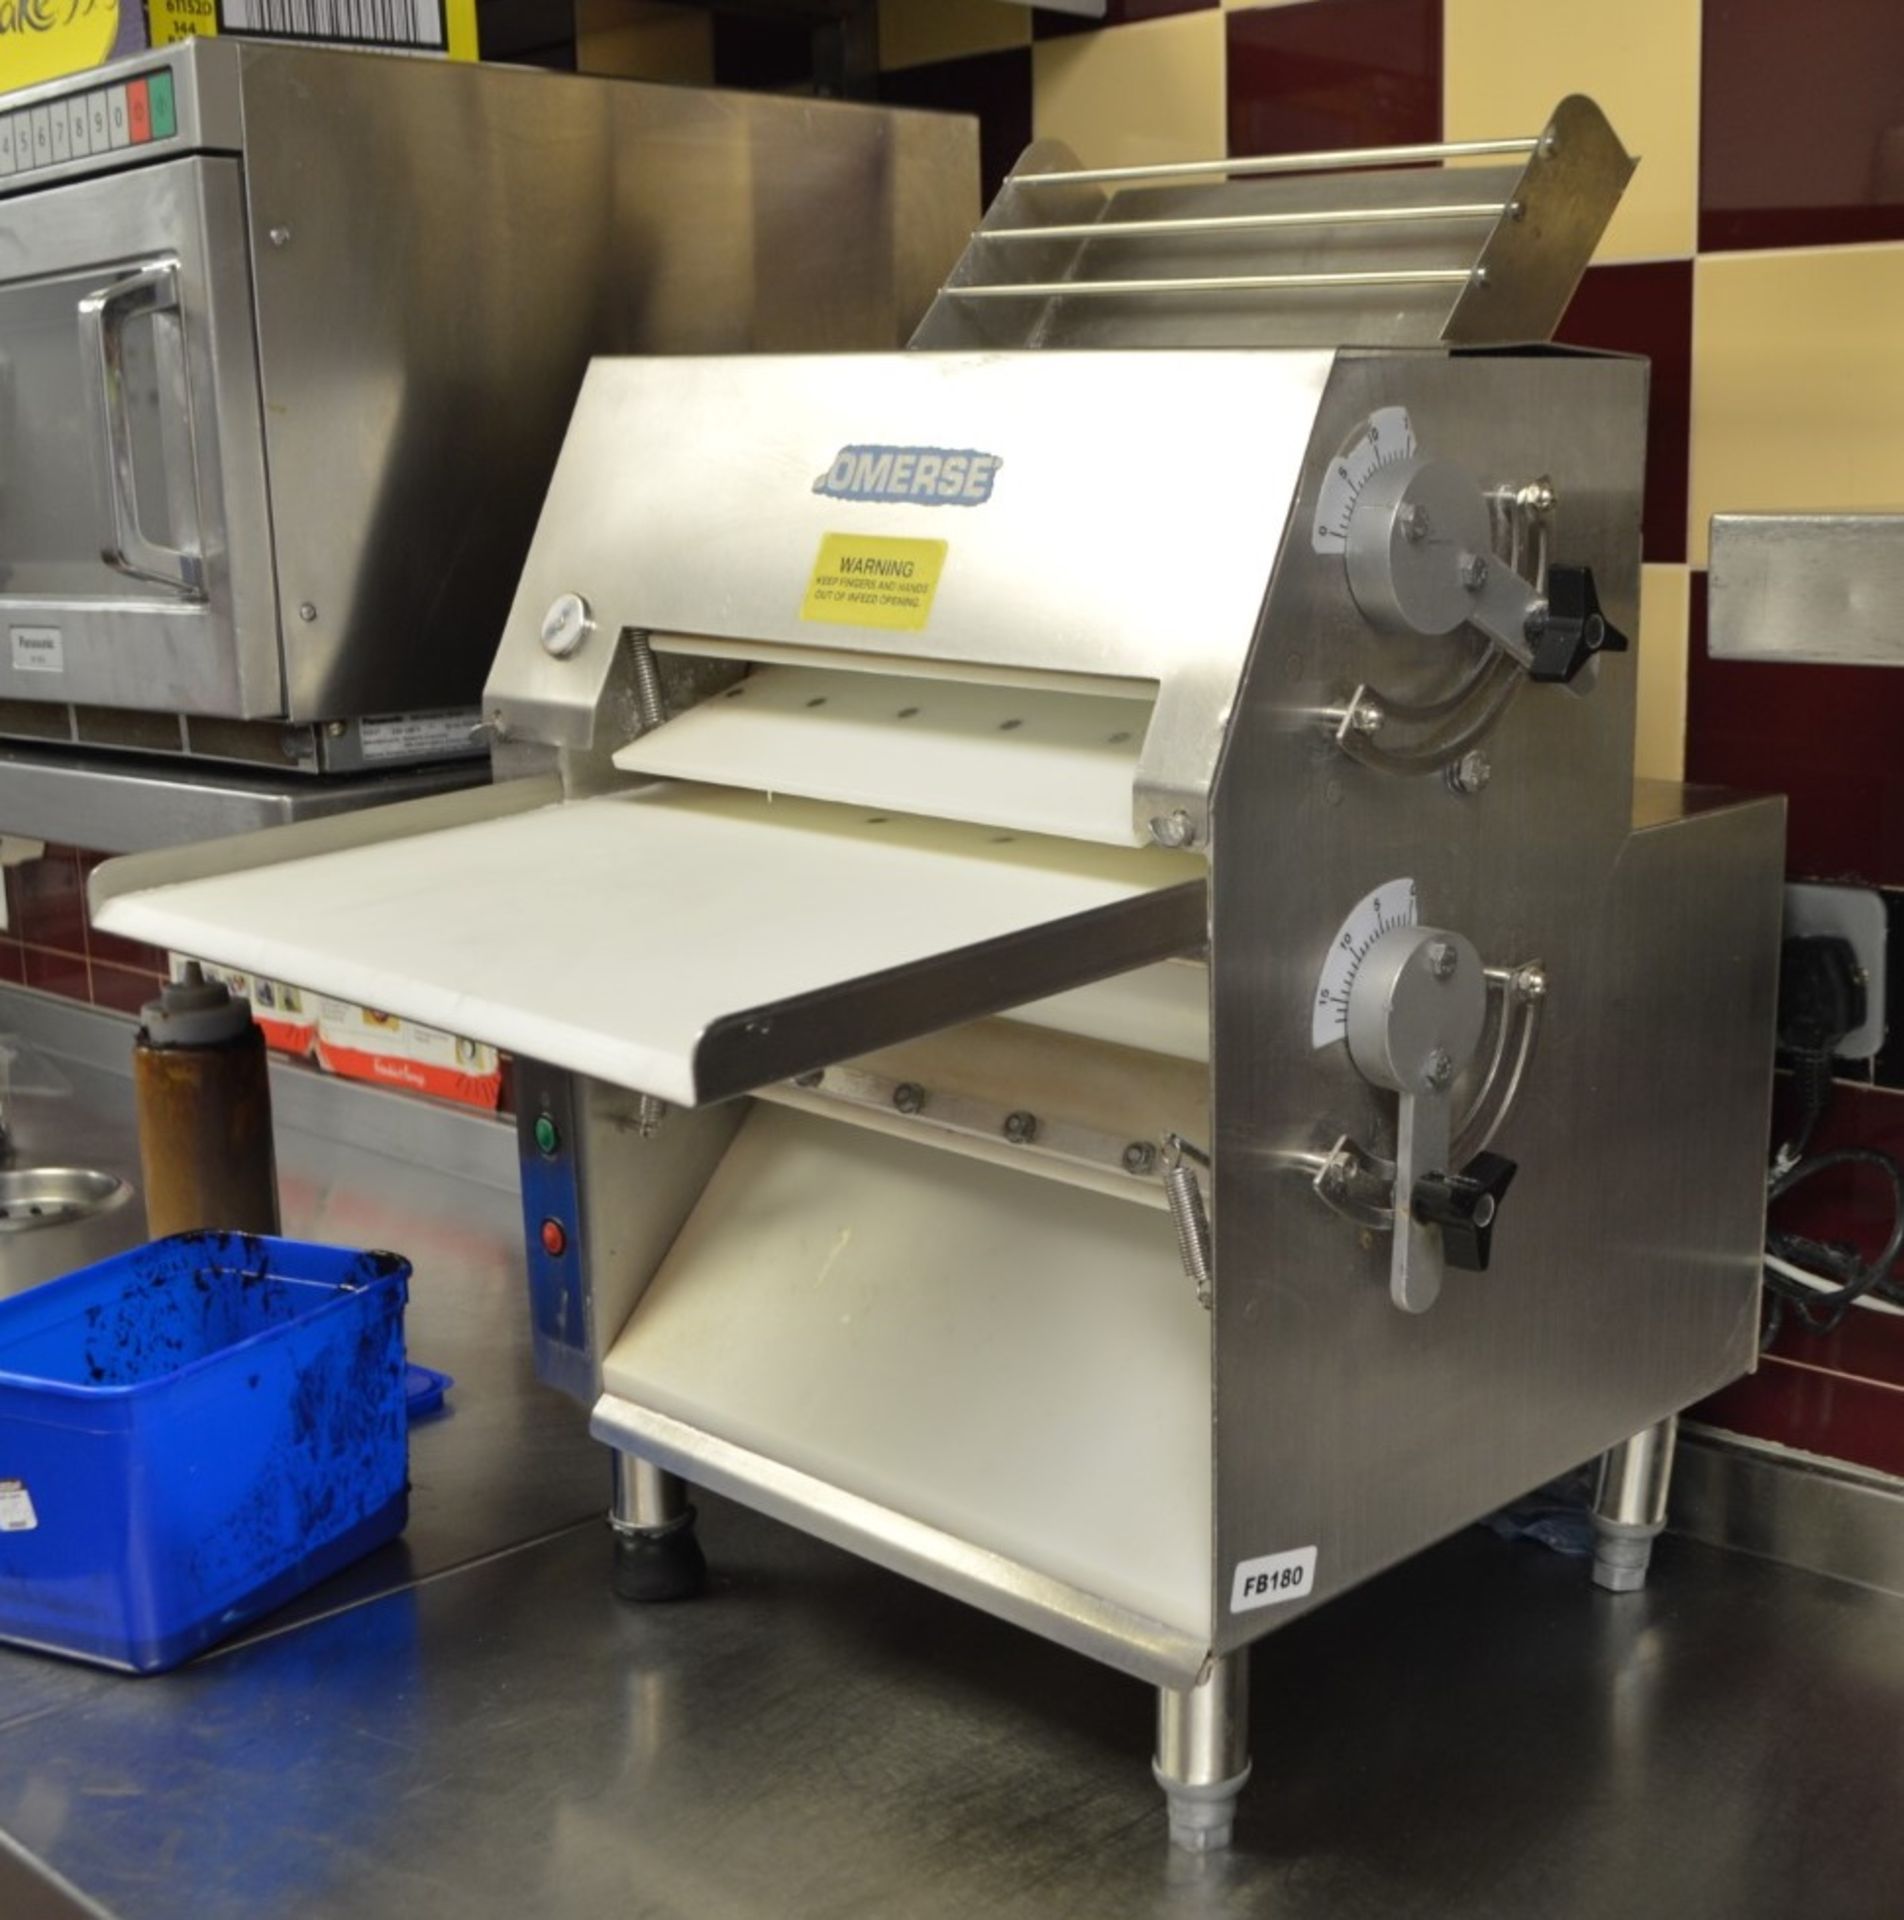 1 x Somerset Dough Roller - Model CDR1550 - Suitable For Pizza, Naans, Chatati Wraps etc - Ref FB180 - Image 3 of 6